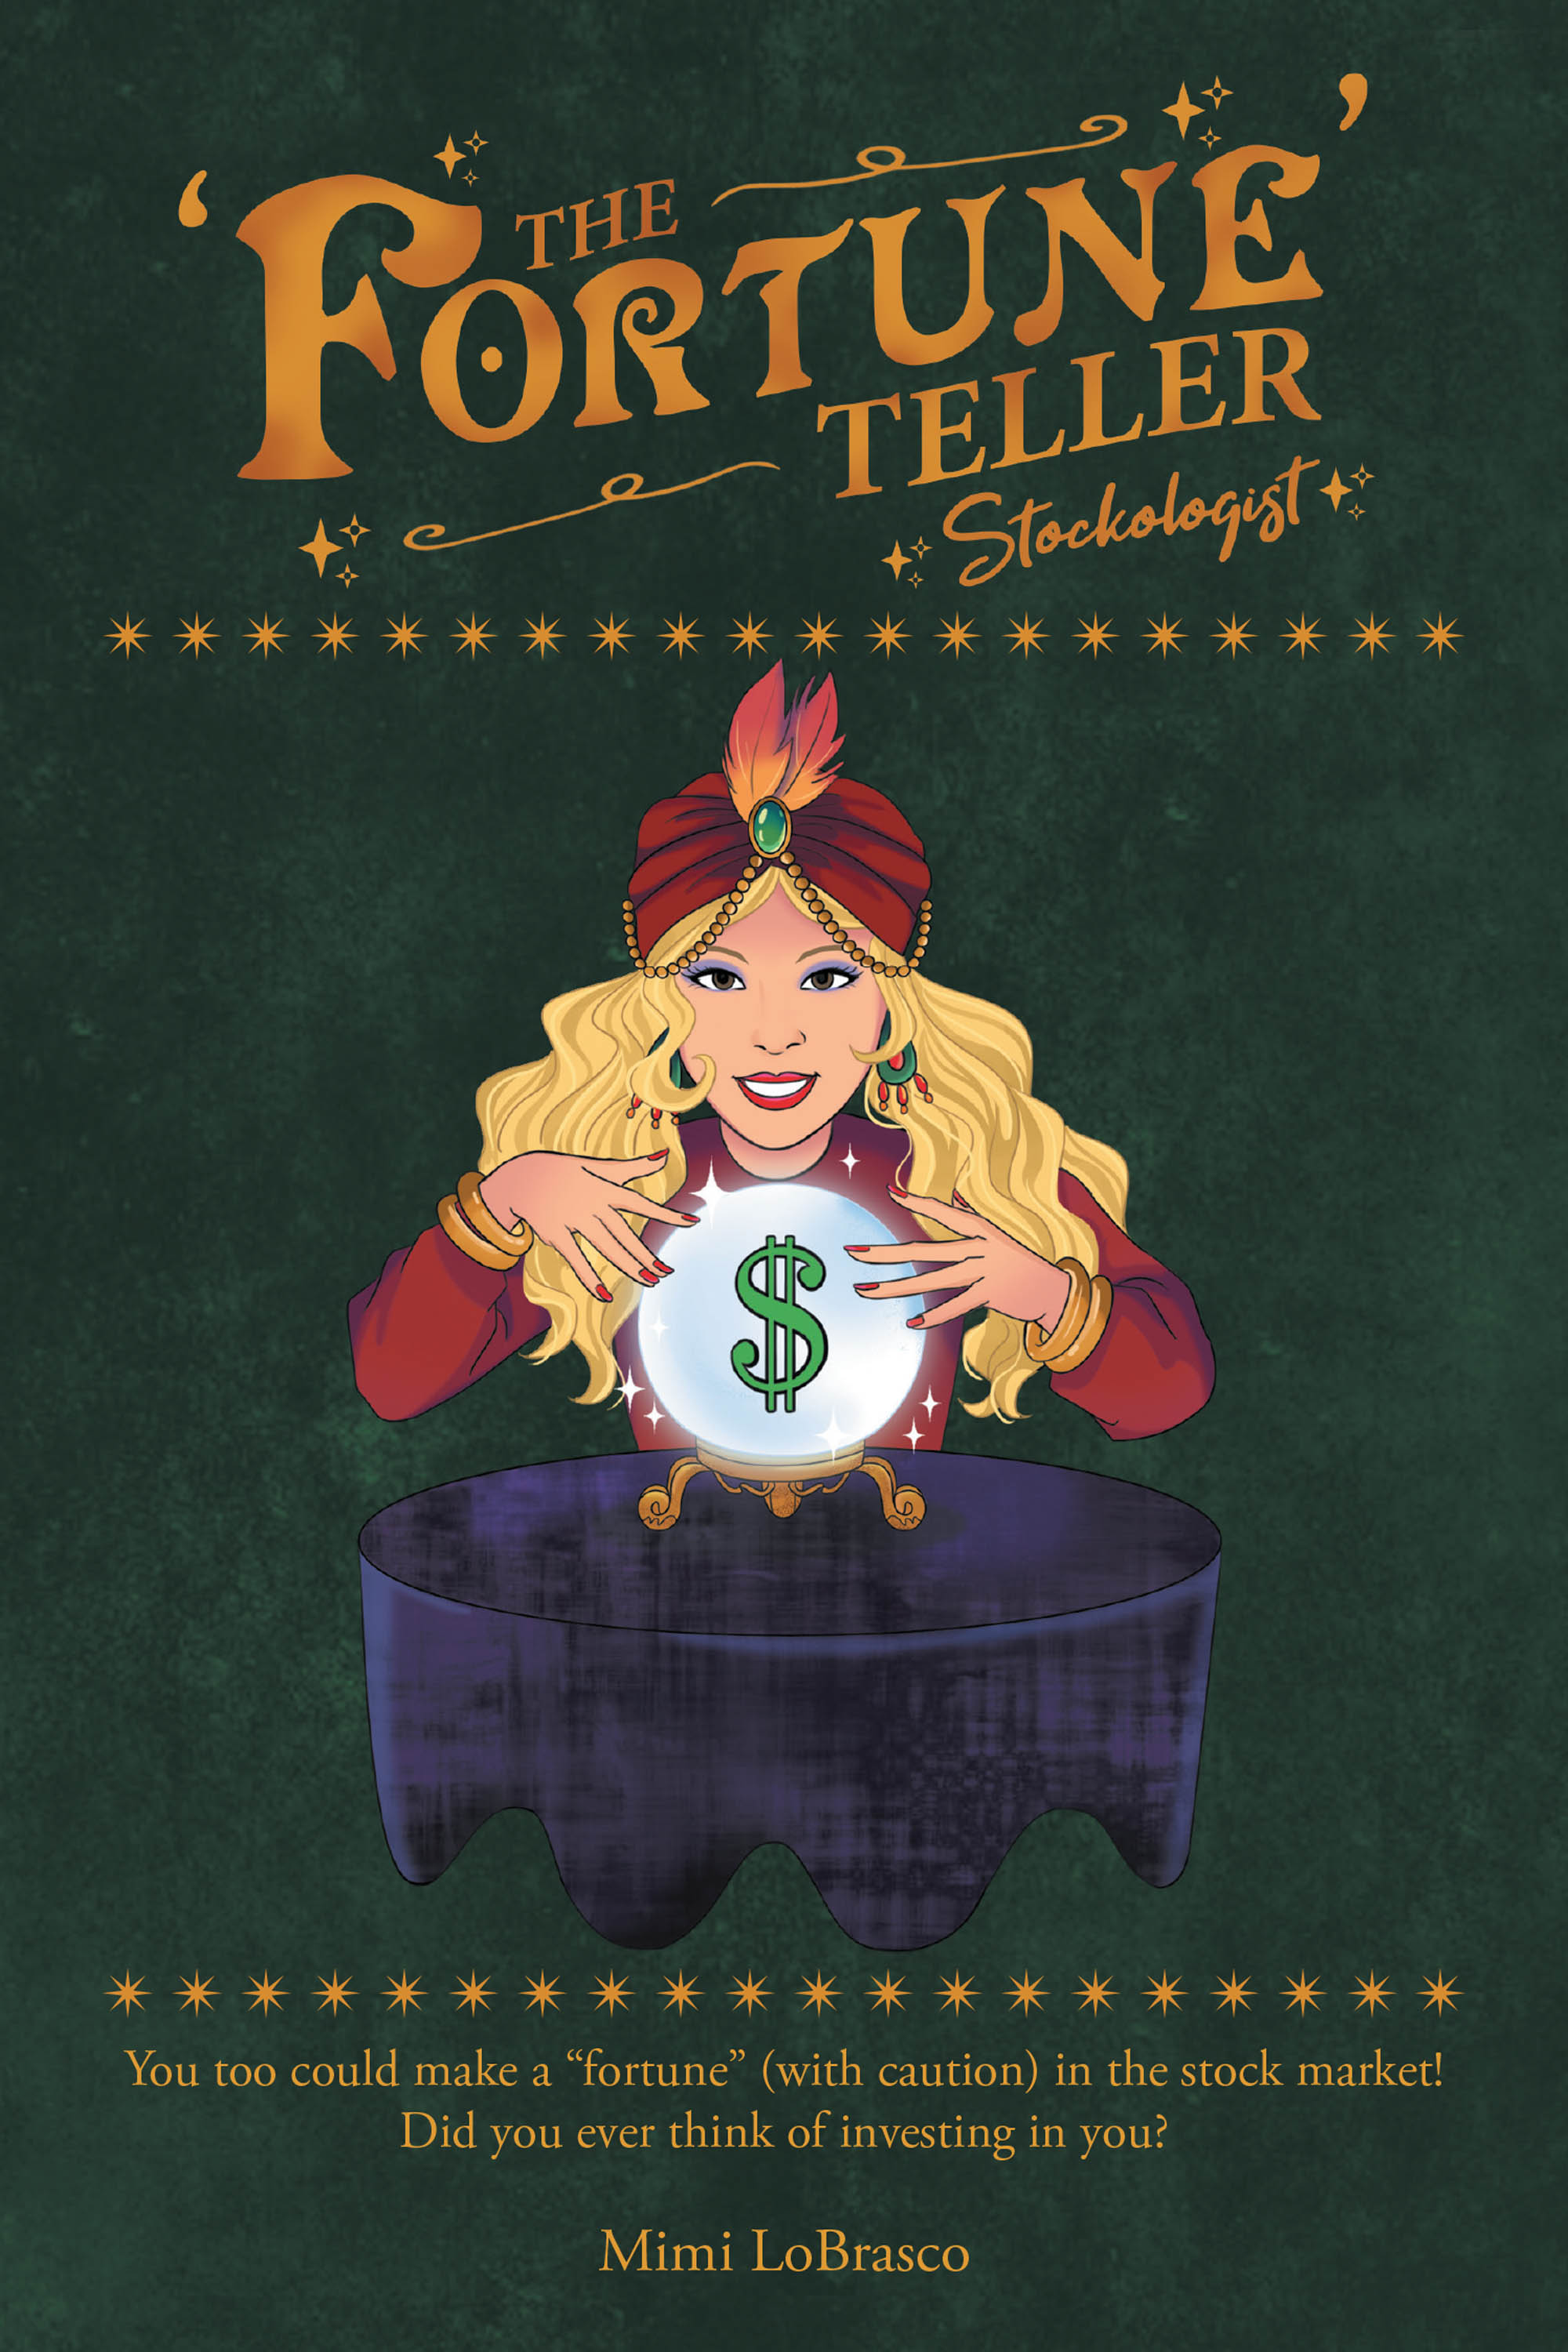 Mimi LoBrasco’s New Book, “The 'Fortune' Teller Stockologist,” is an Enlightening Beginner’s Guide to Demystifying the Stock Market and Gaining Financial Independence